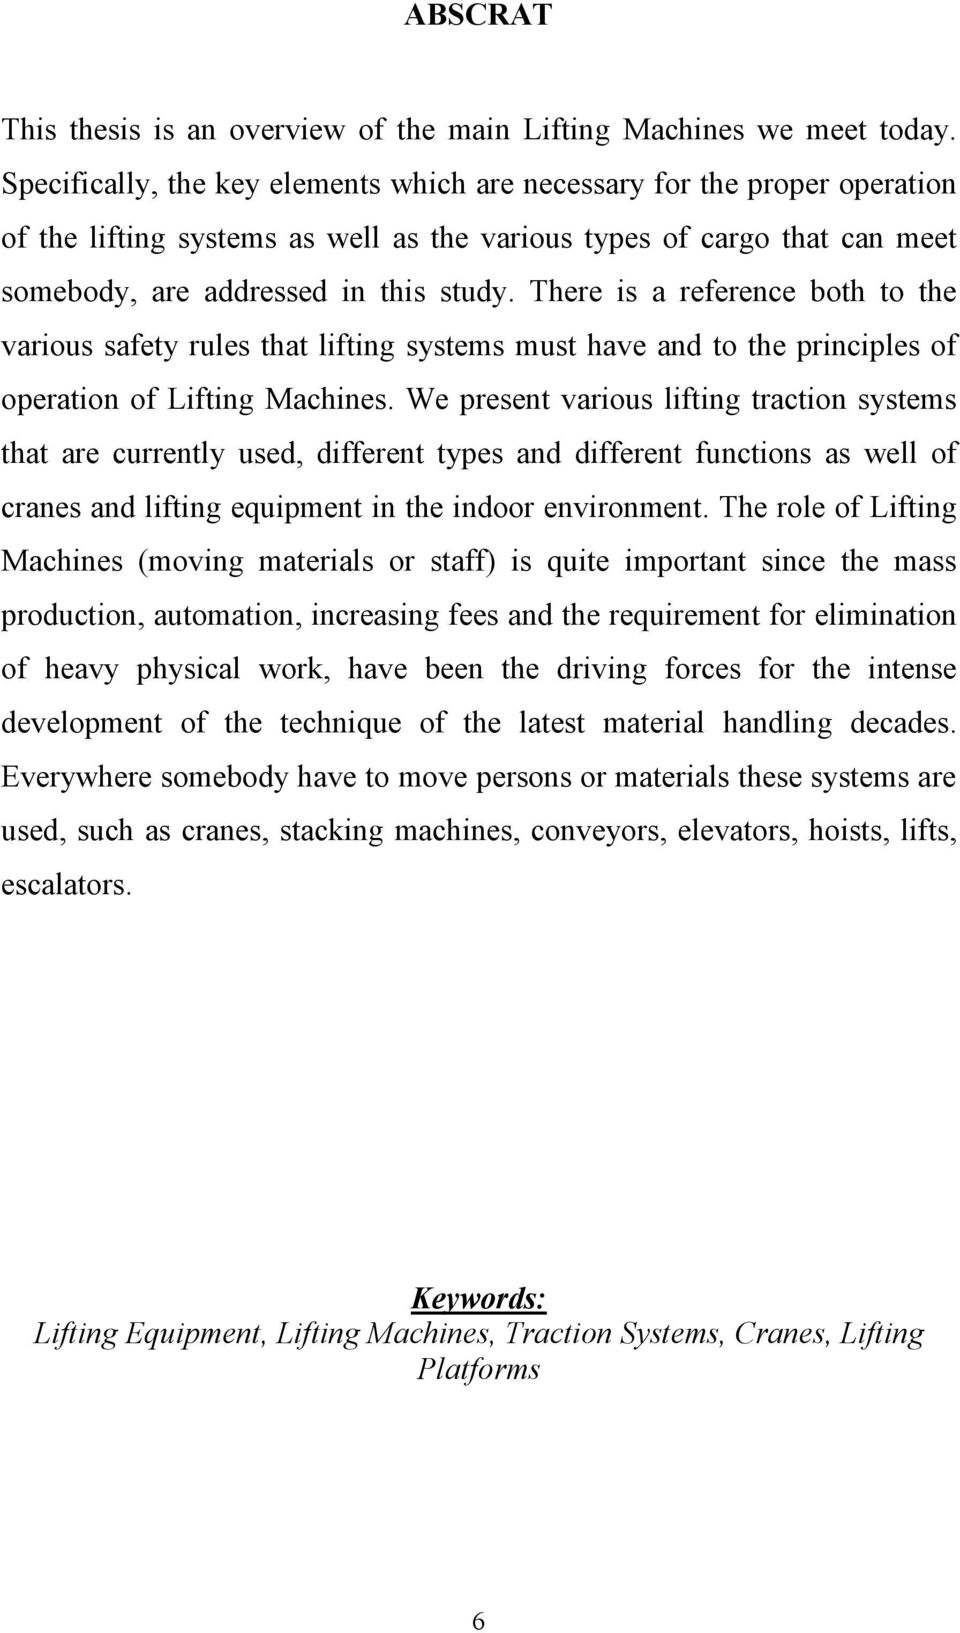 There is a reference both to the various safety rules that lifting systems must have and to the principles of operation of Lifting Machines.